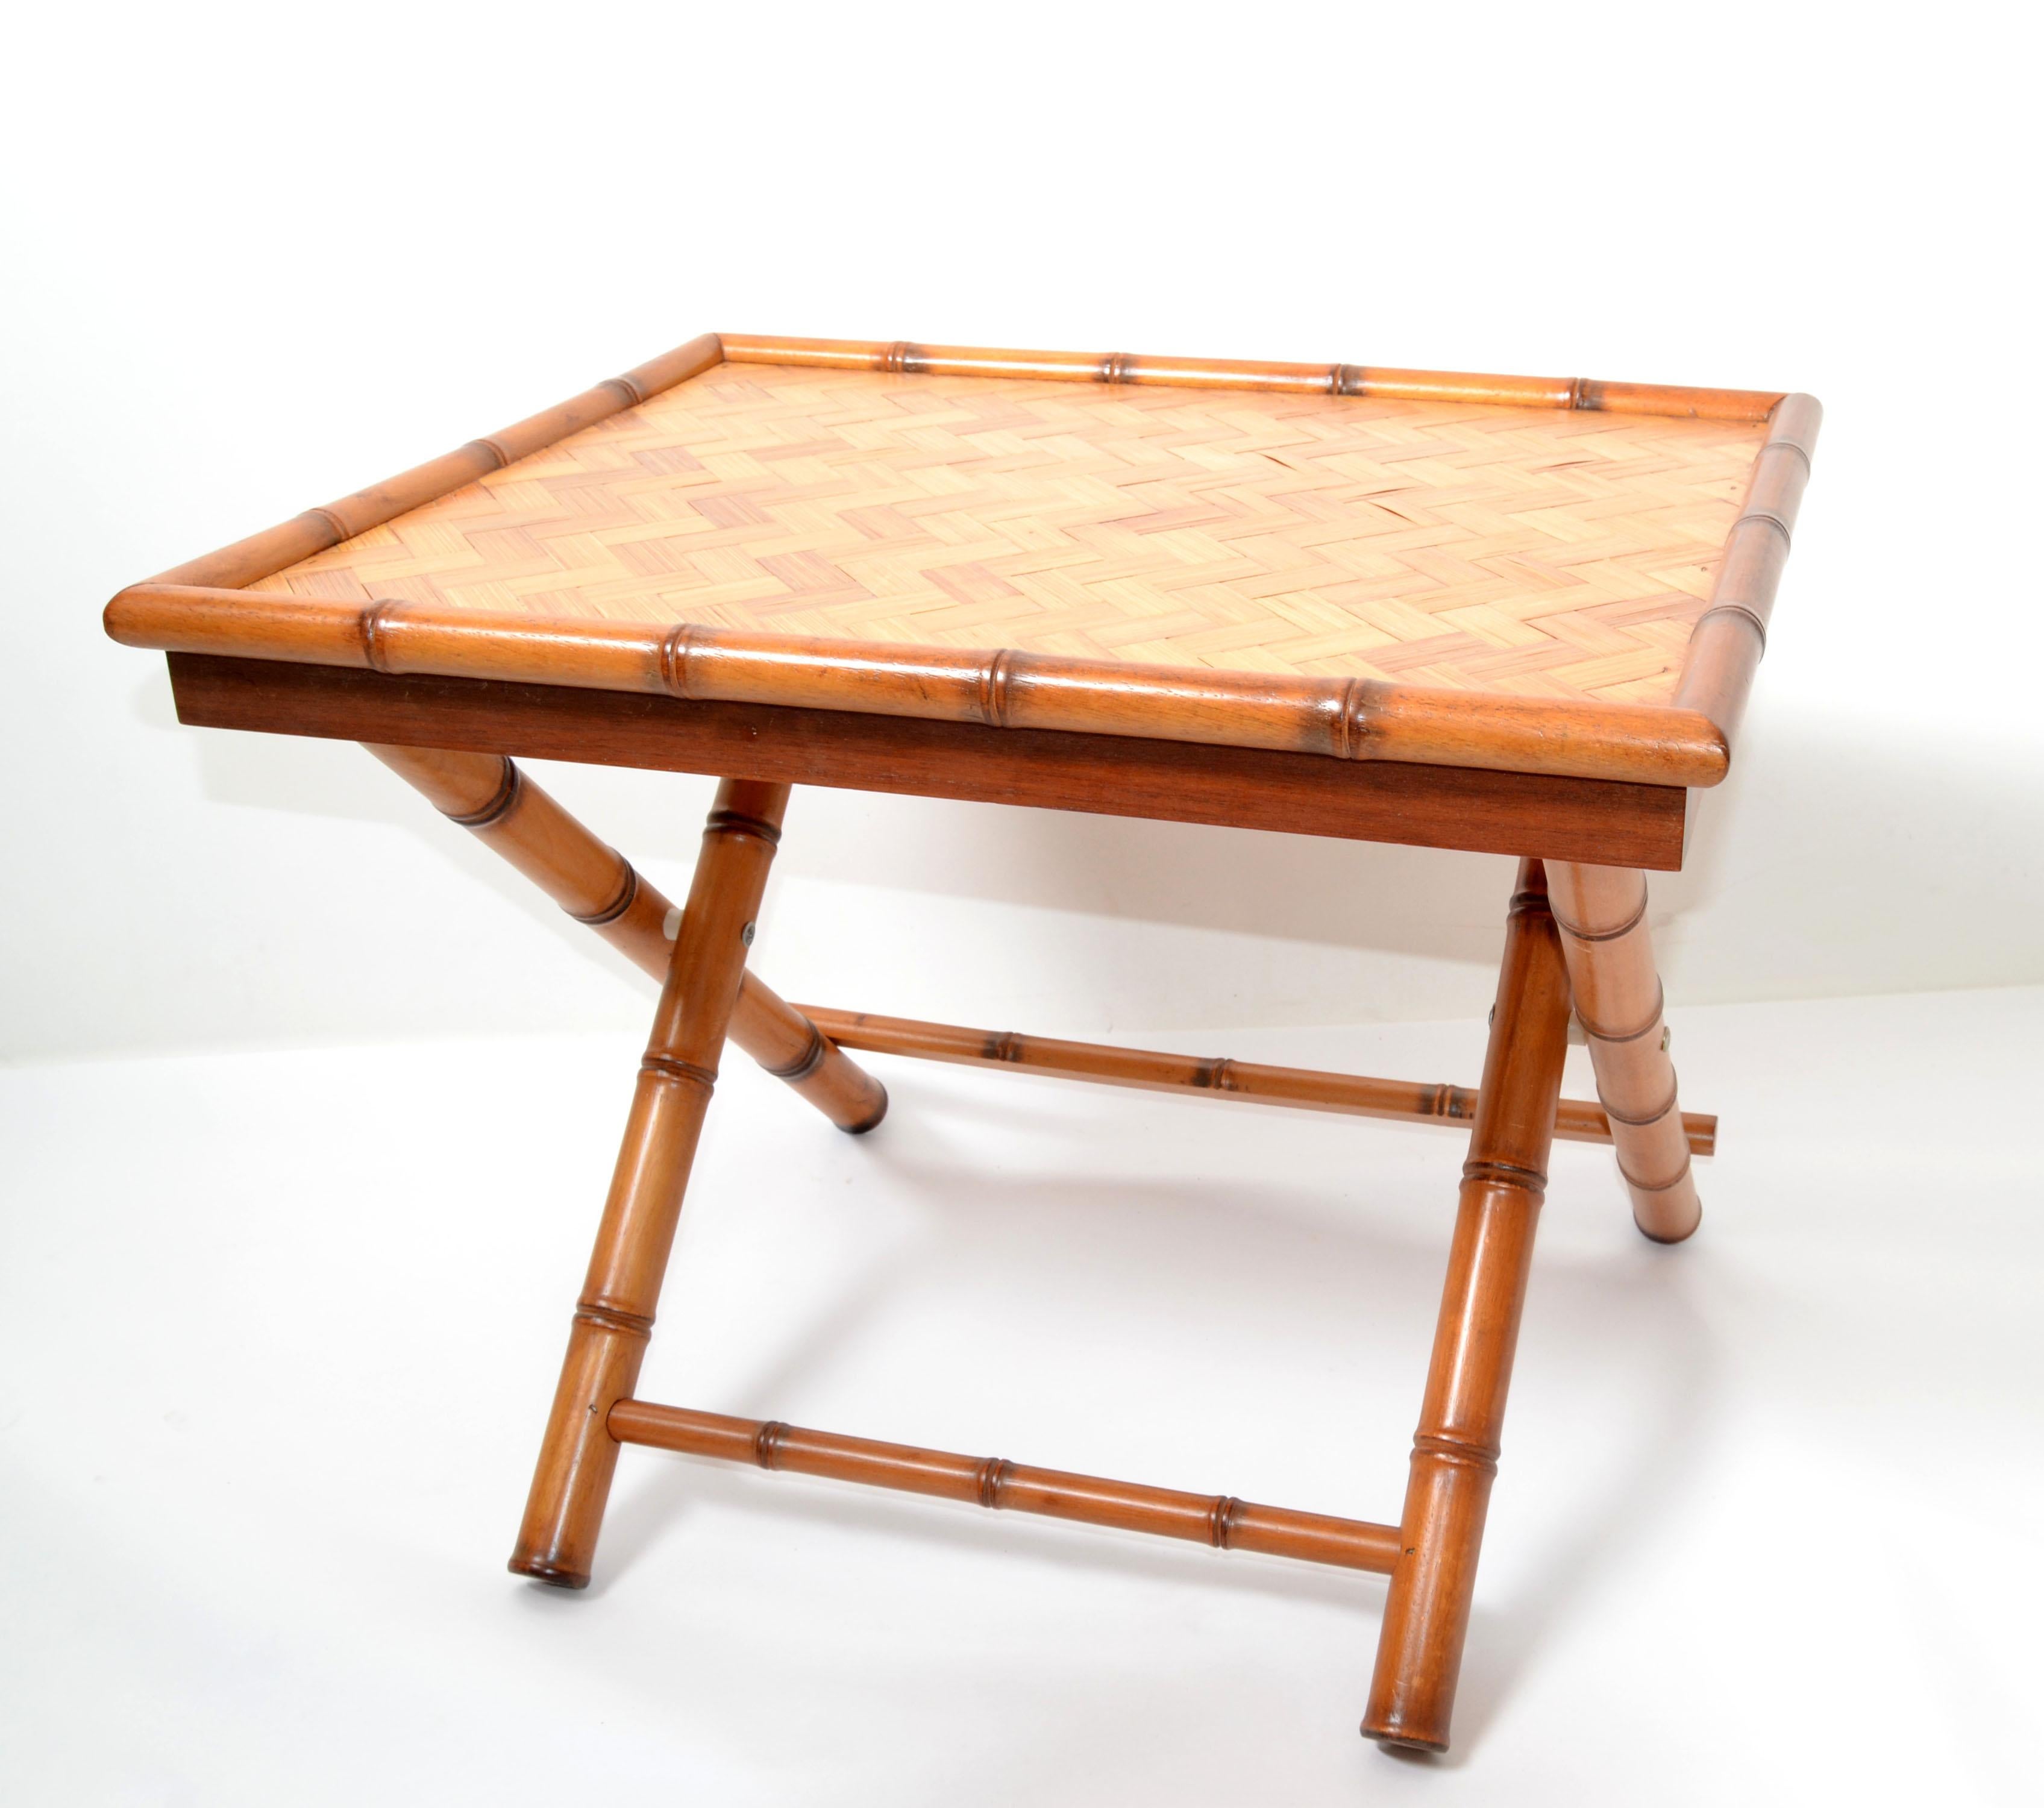 Vintage Handcrafted Rectangle Bamboo Serving Folding Table, Center Table X-Base (amerikanisch) im Angebot